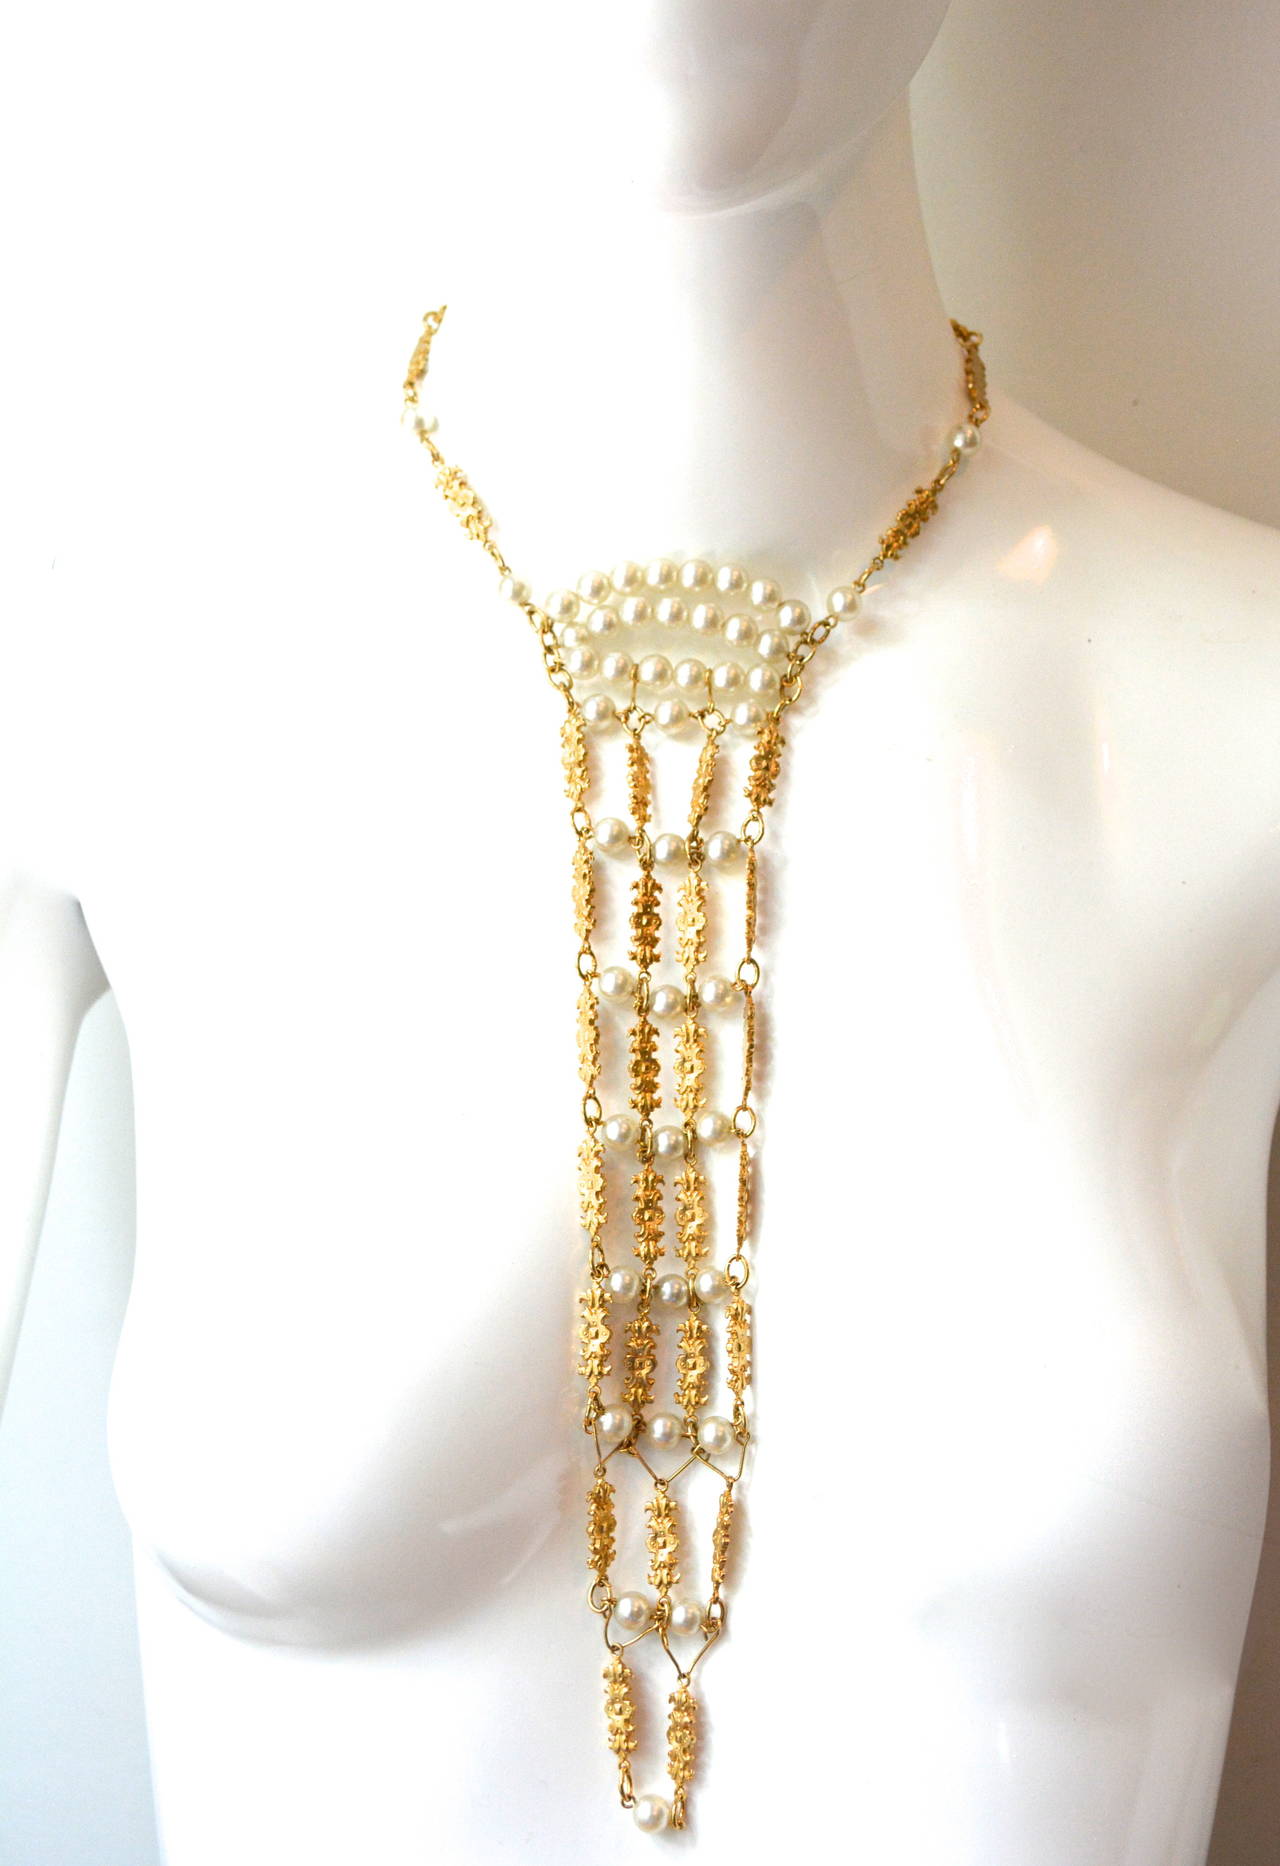 1960s Mod Pearl Body Jewelry Necklace In Excellent Condition For Sale In Litchfield County, CT